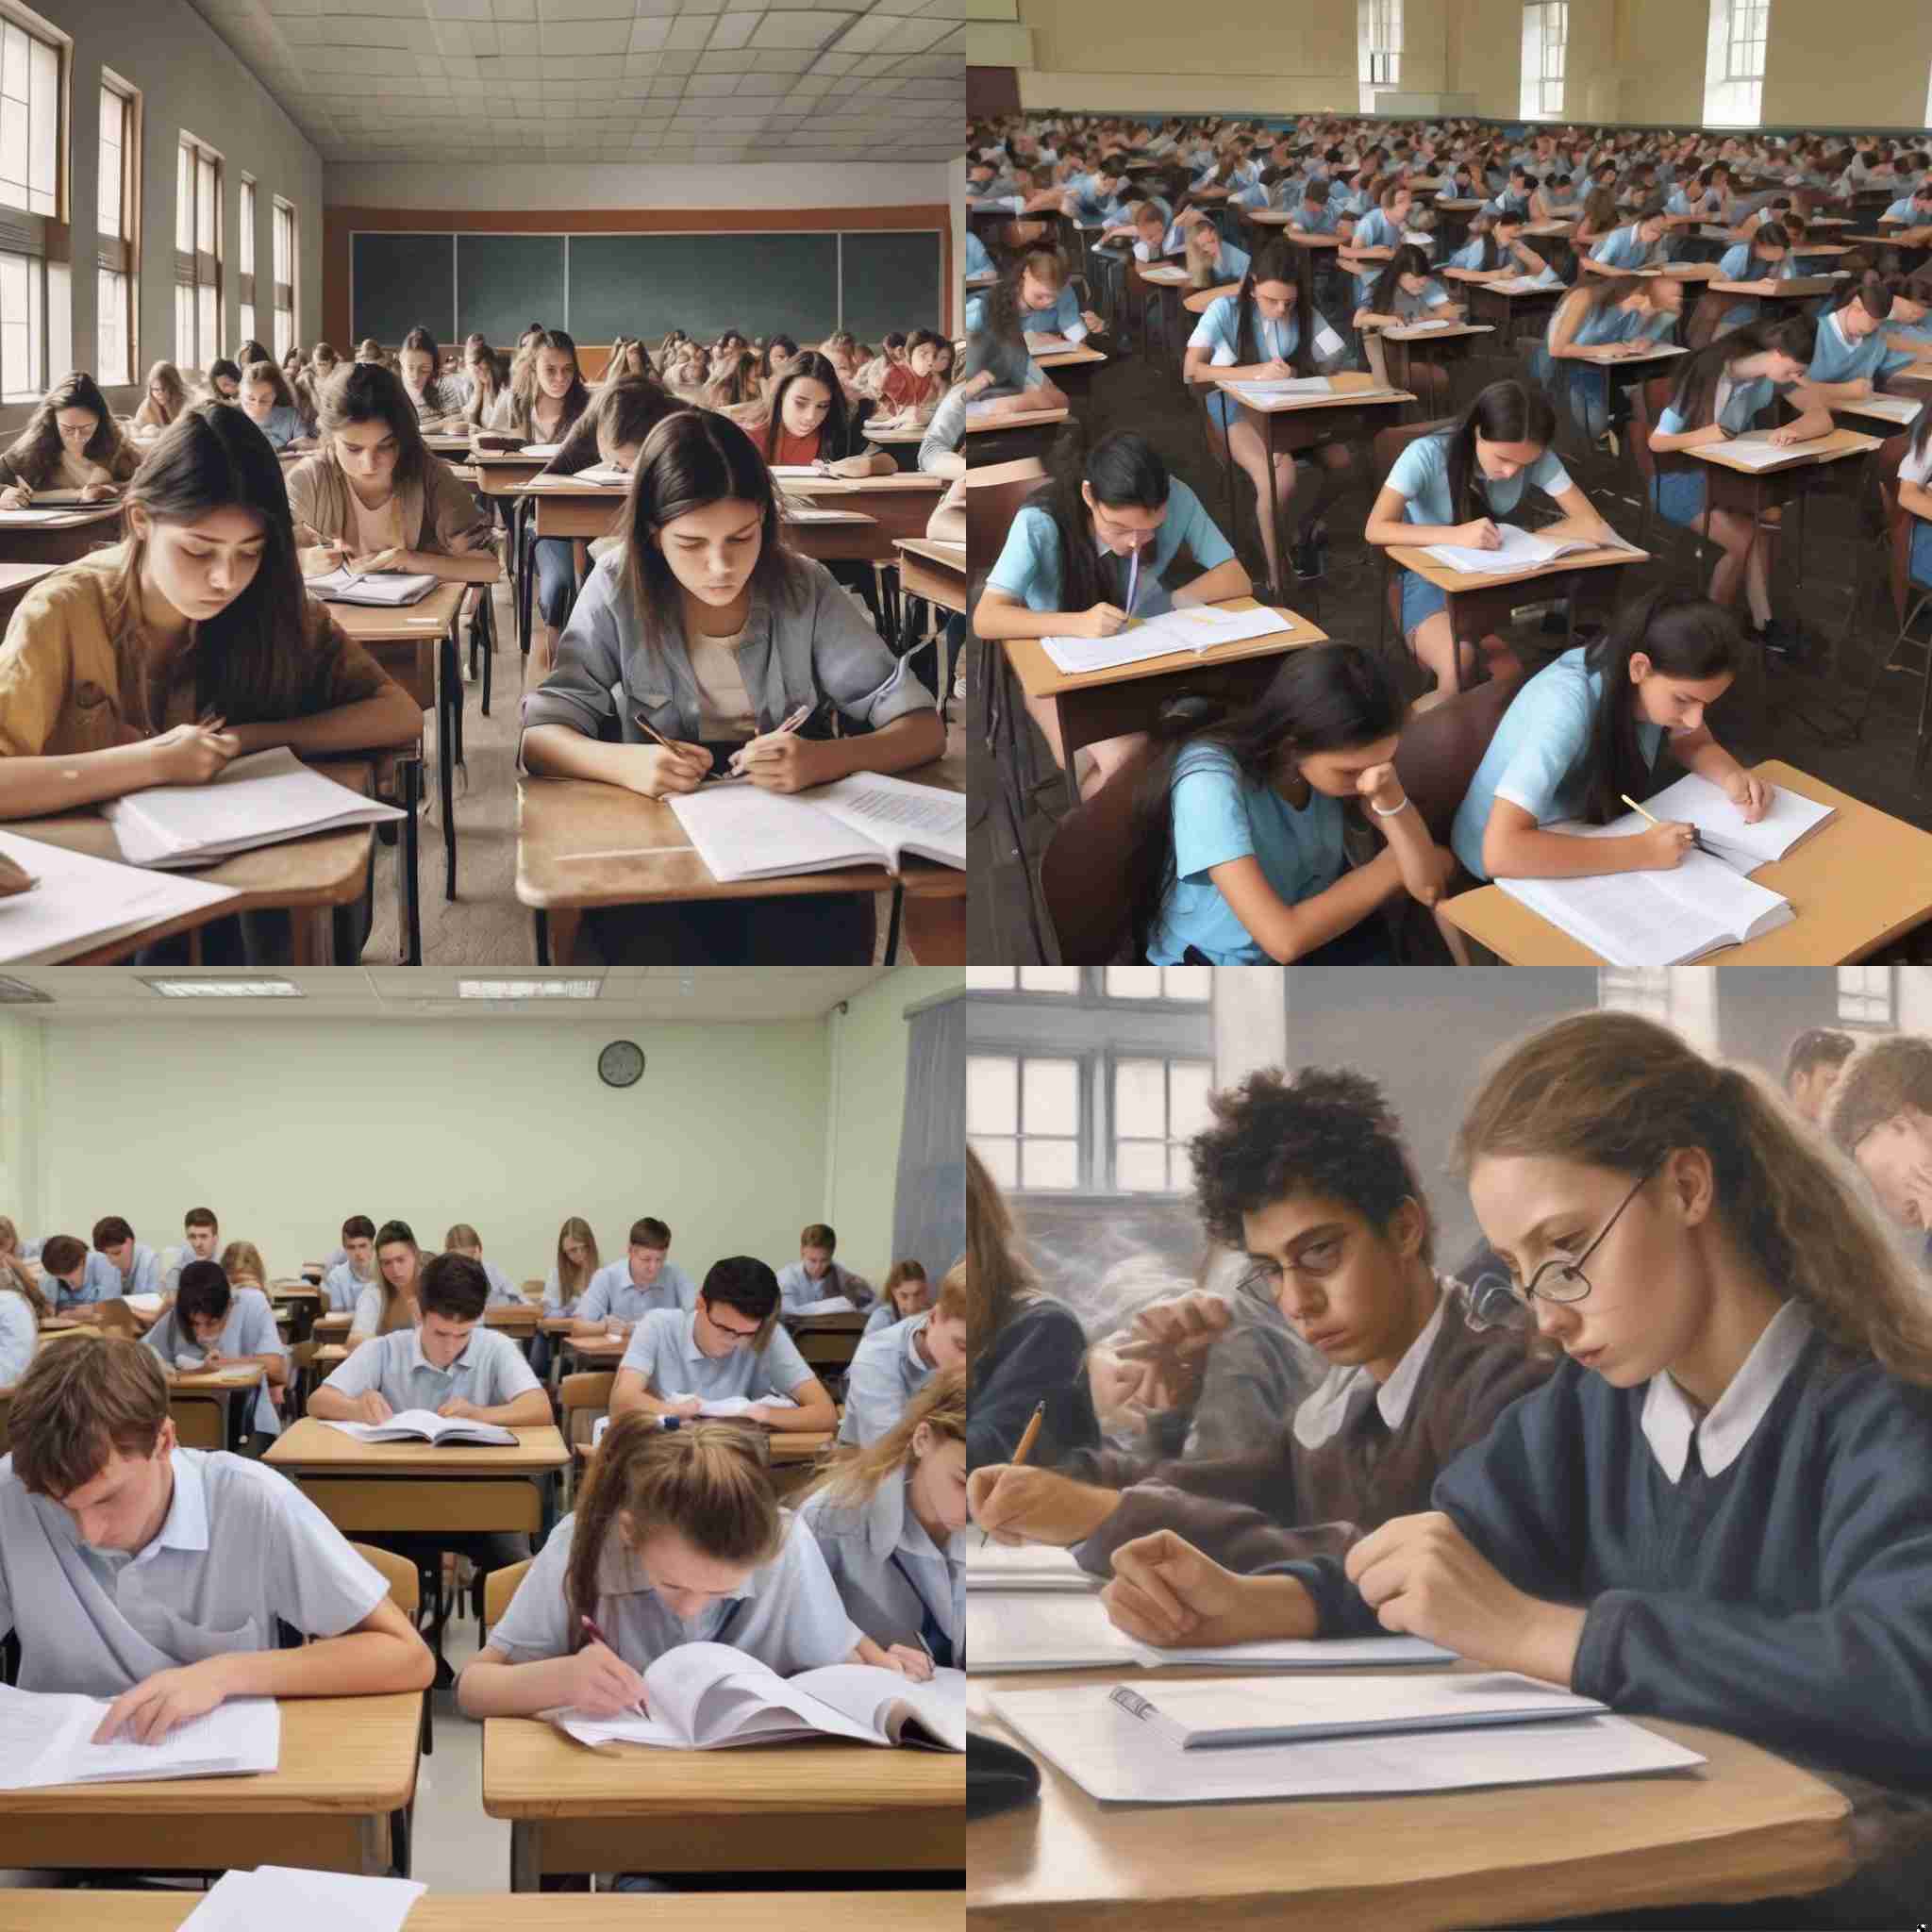 Students during an exam